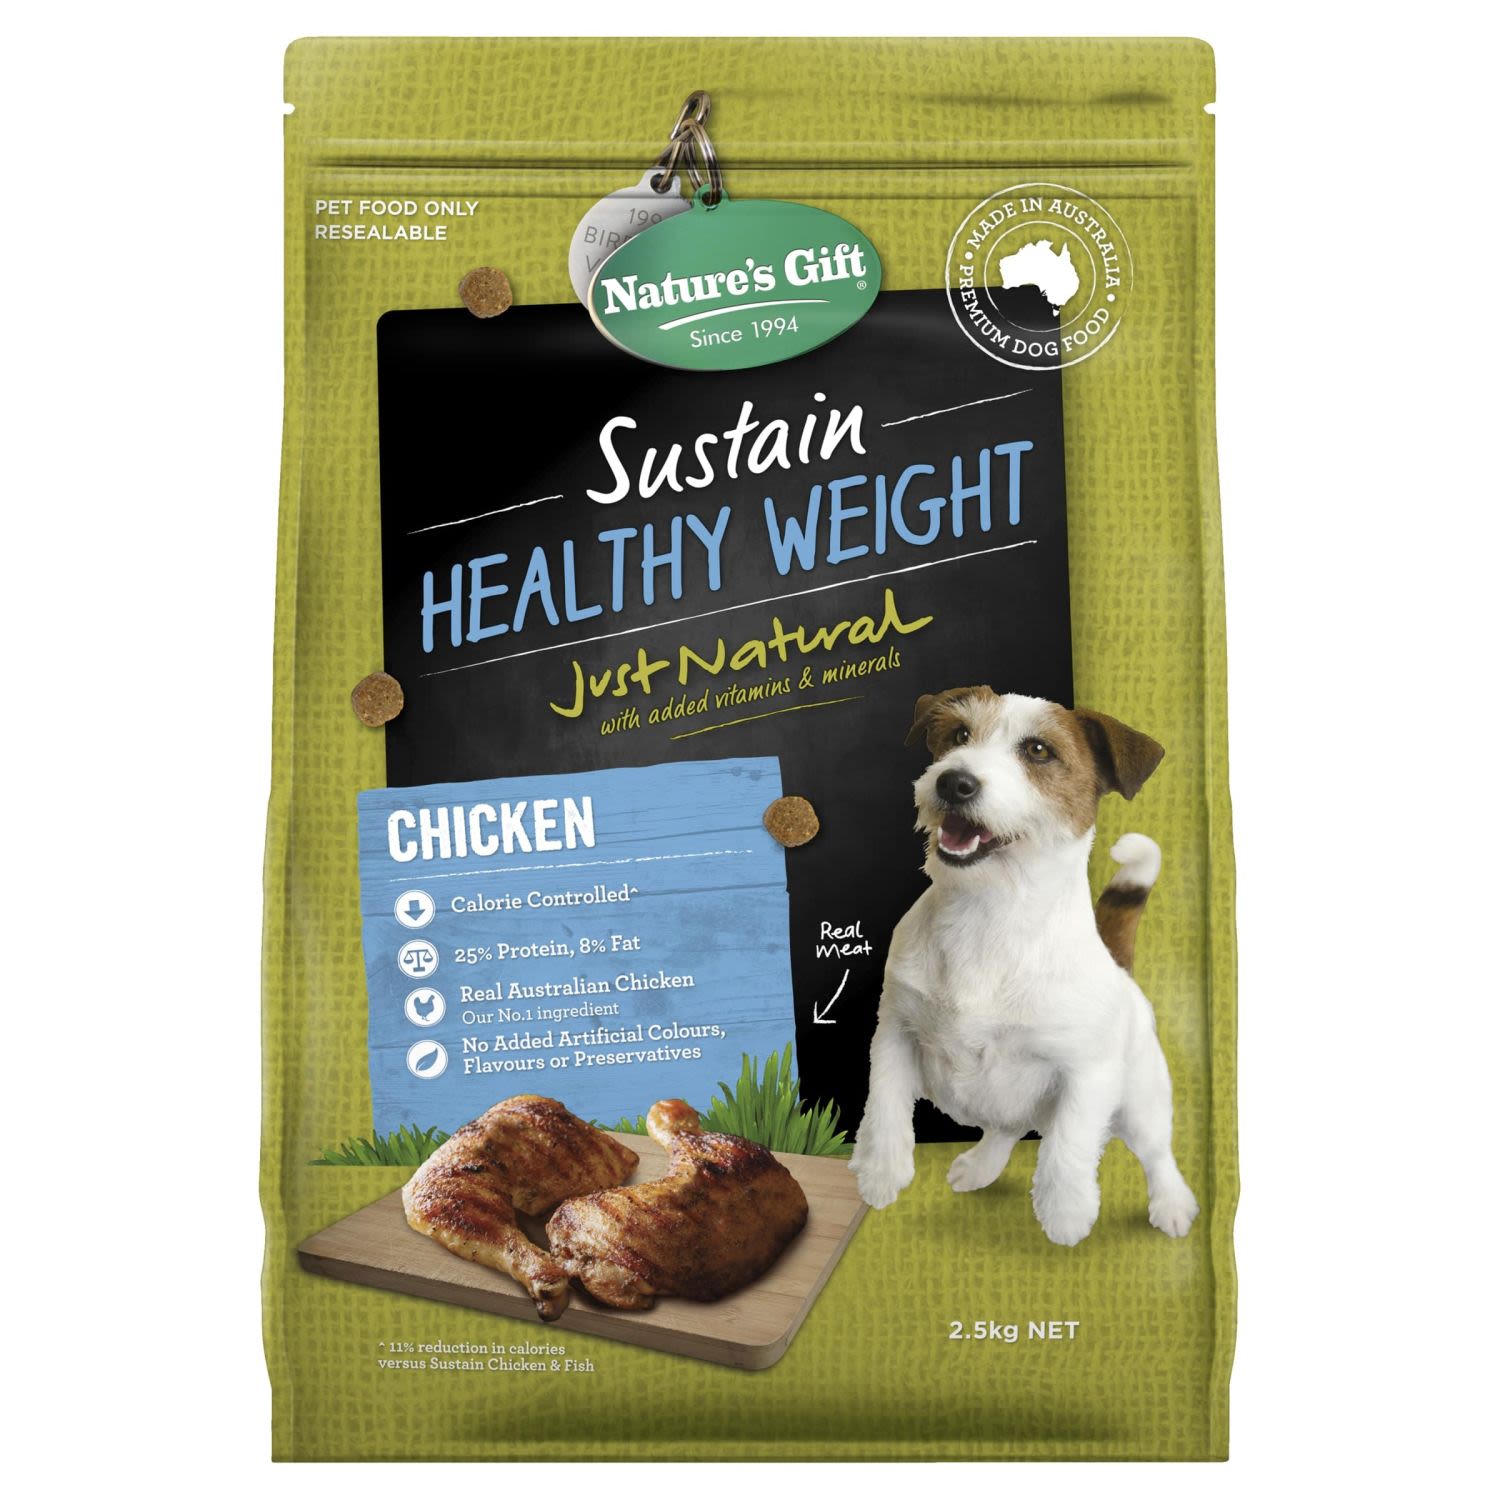 Nature's Gift Sustain Healthy Weight Chicken Dry Dog Food, 2.5 Kilogram